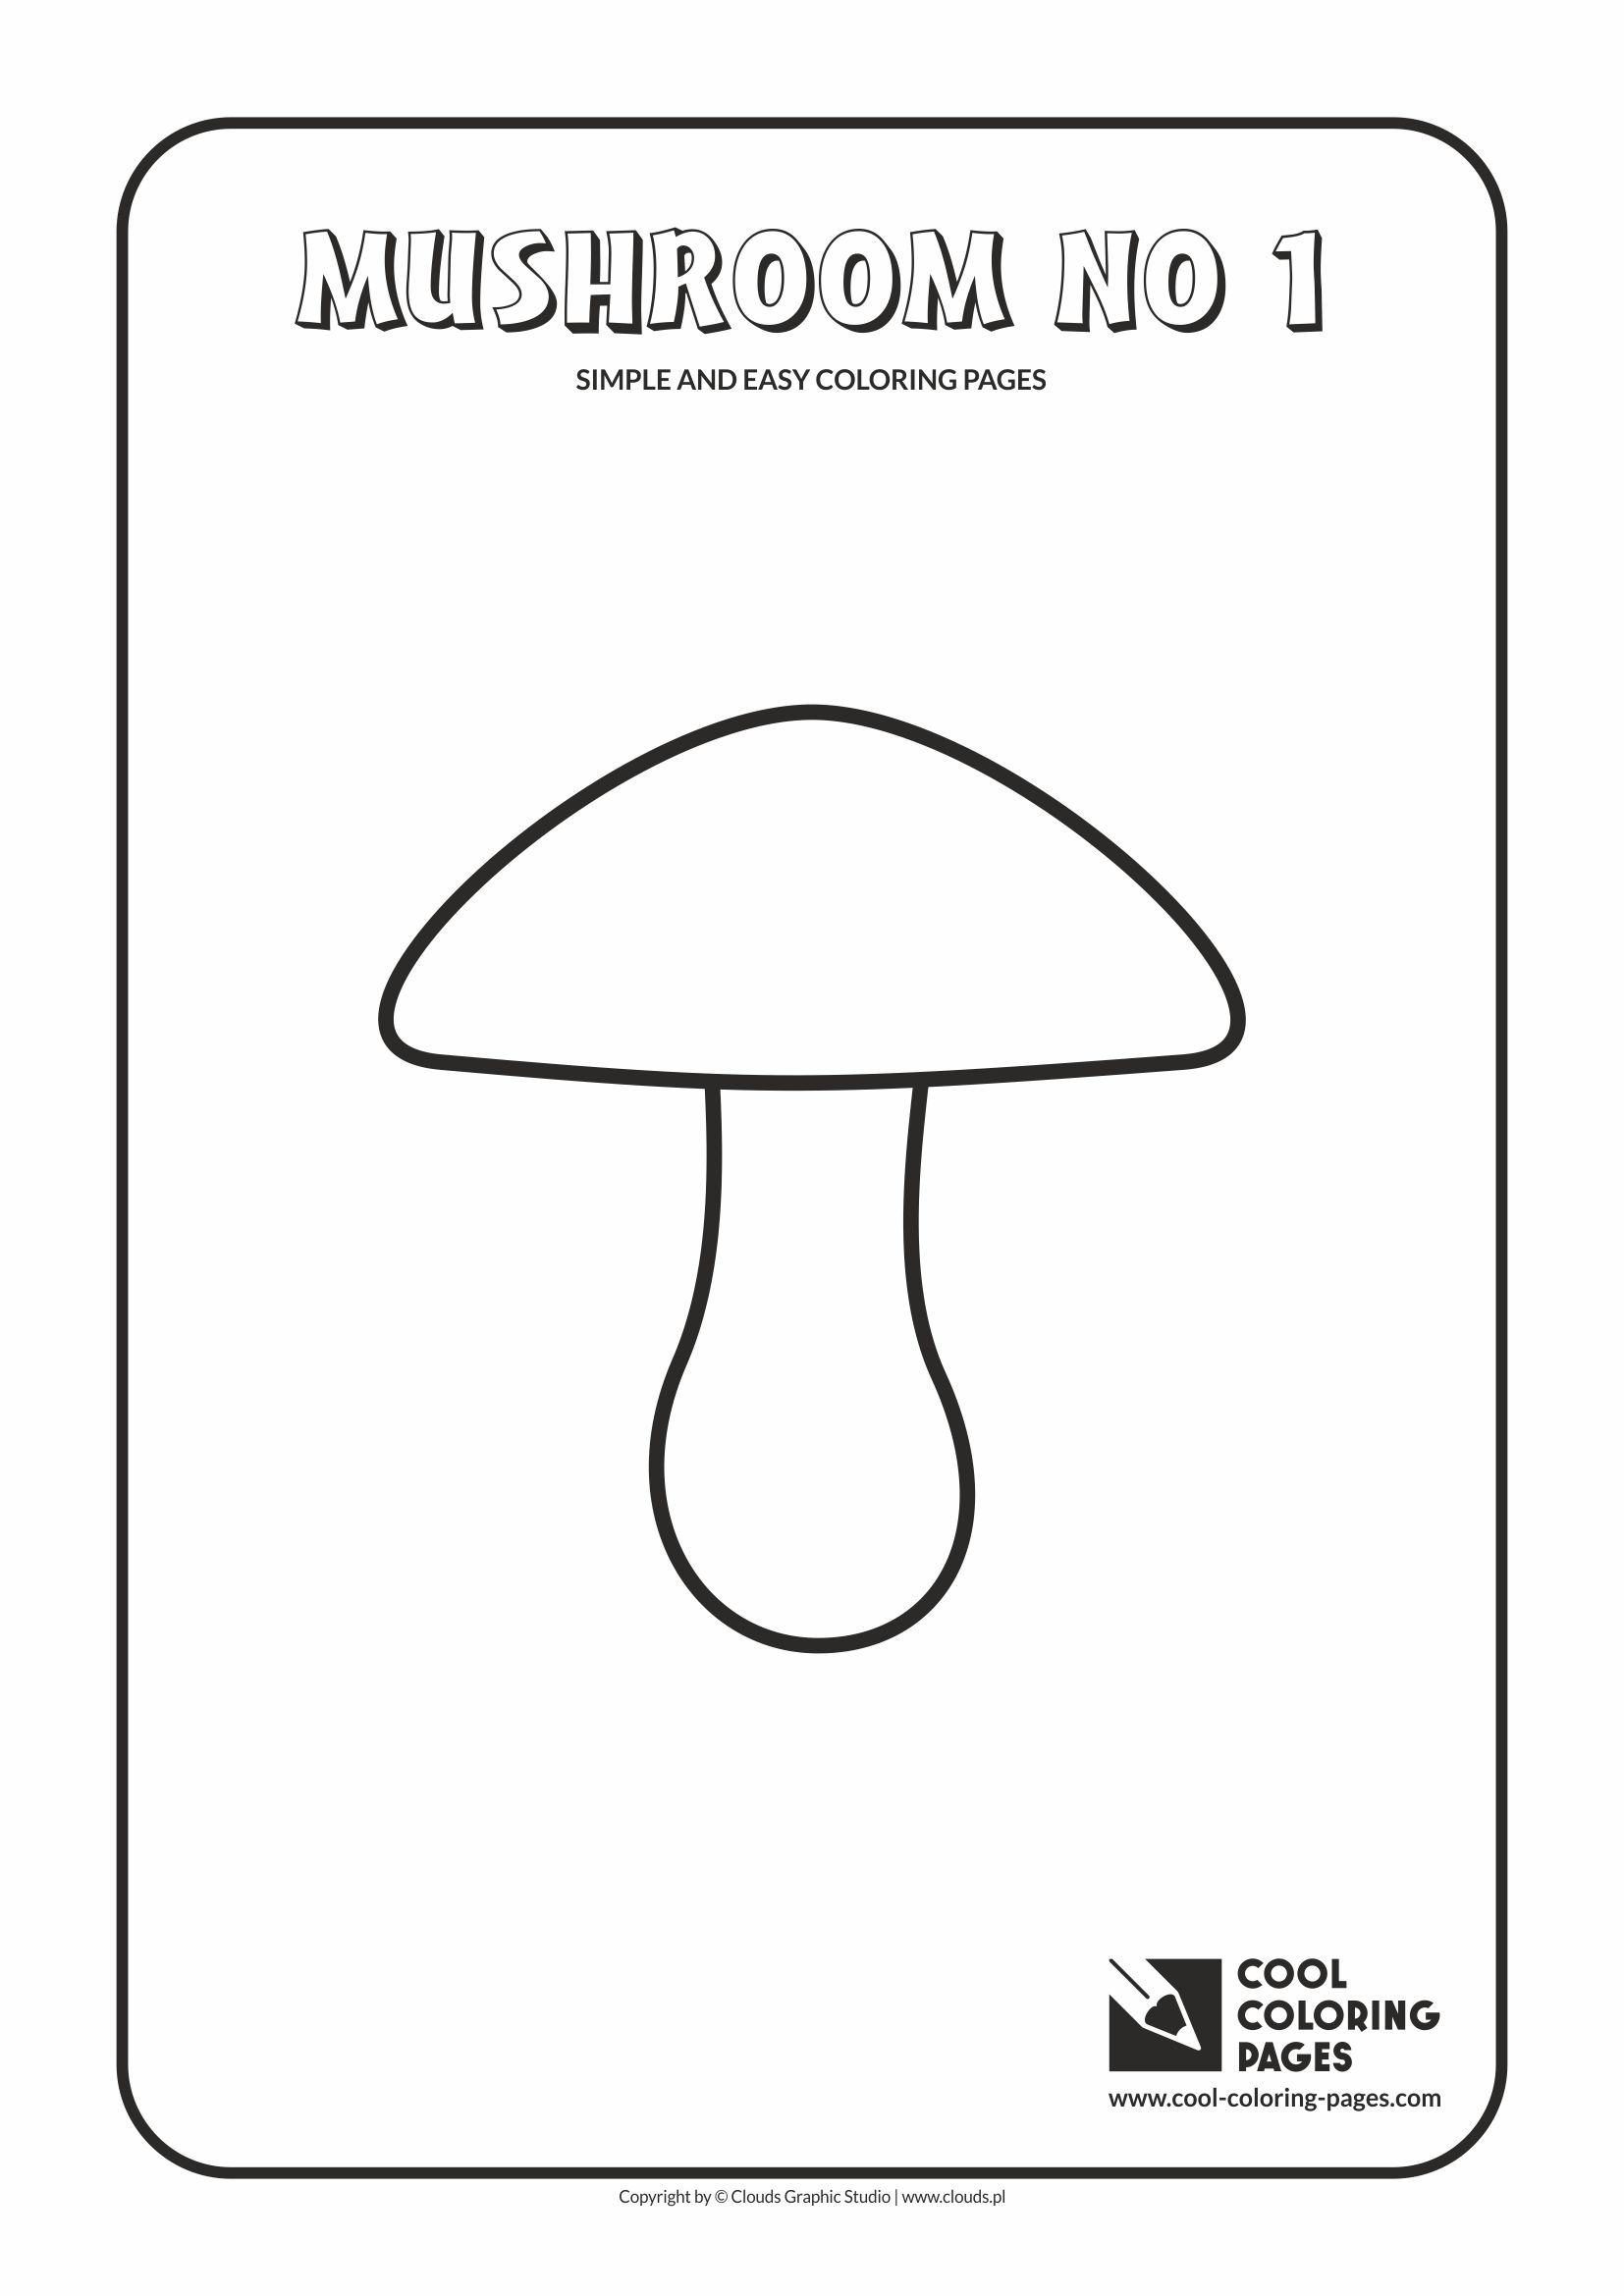 Simple and easy coloring pages for toddlers - Mushroom no 1